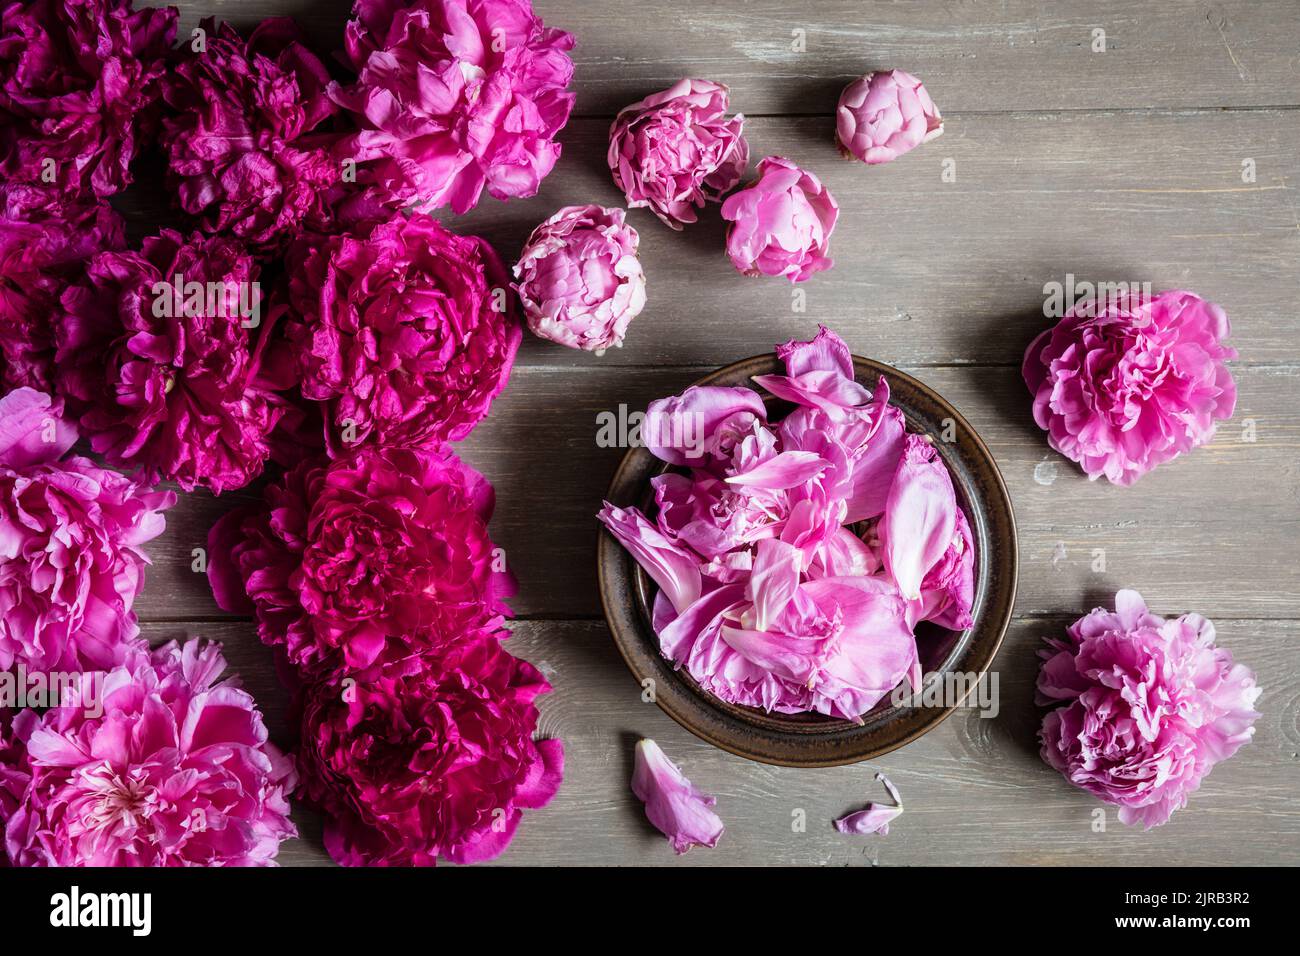 Studio shot of heads of pink blooming peony flowers lying against wooden background Stock Photo